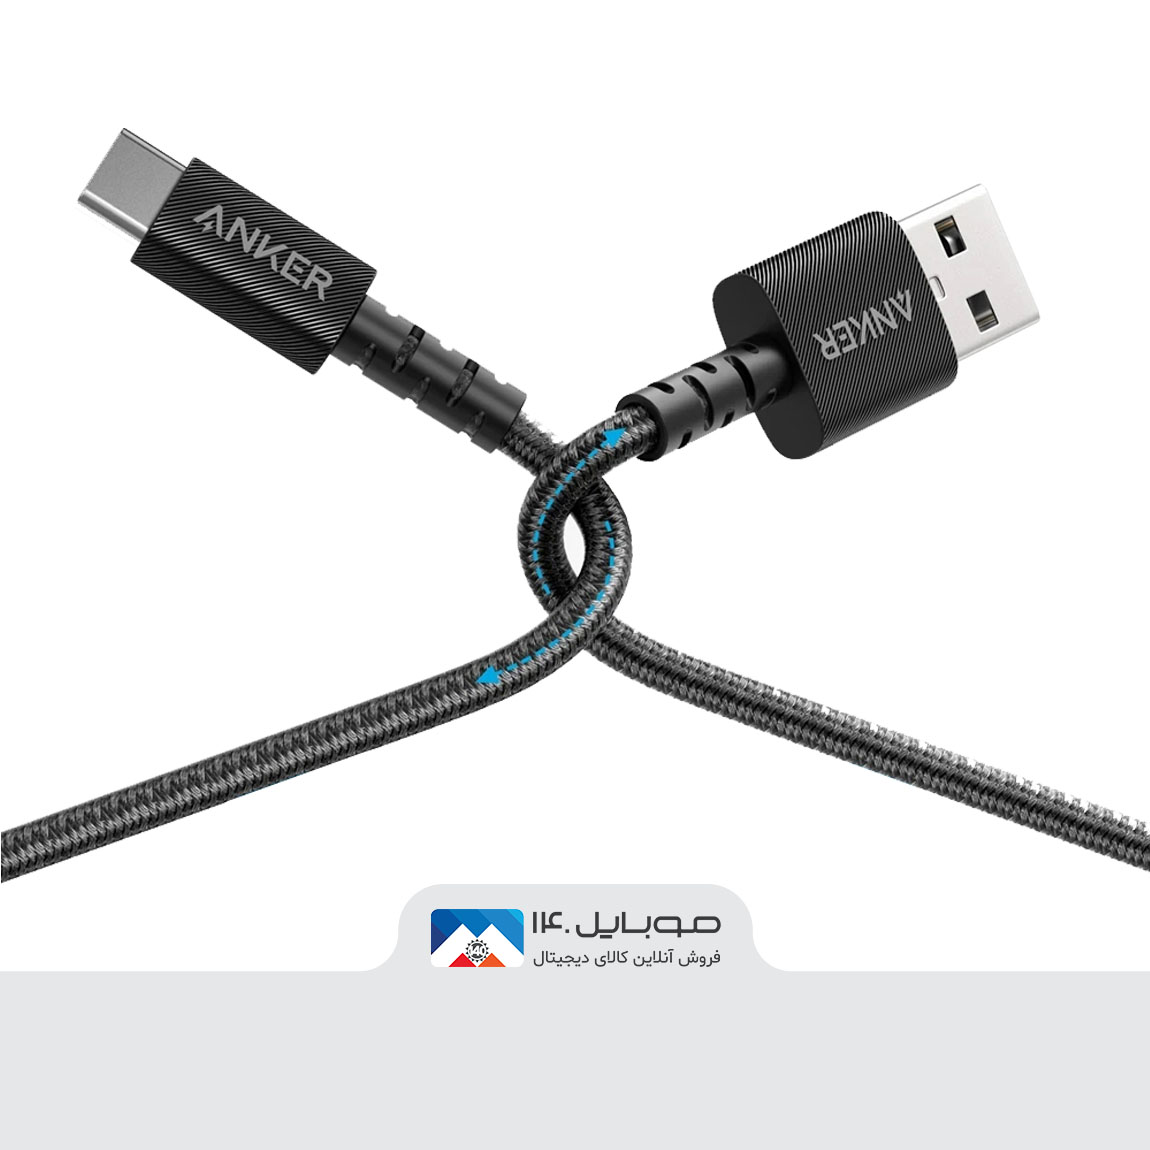  Anker A8022 USB To USB-C Cable 2